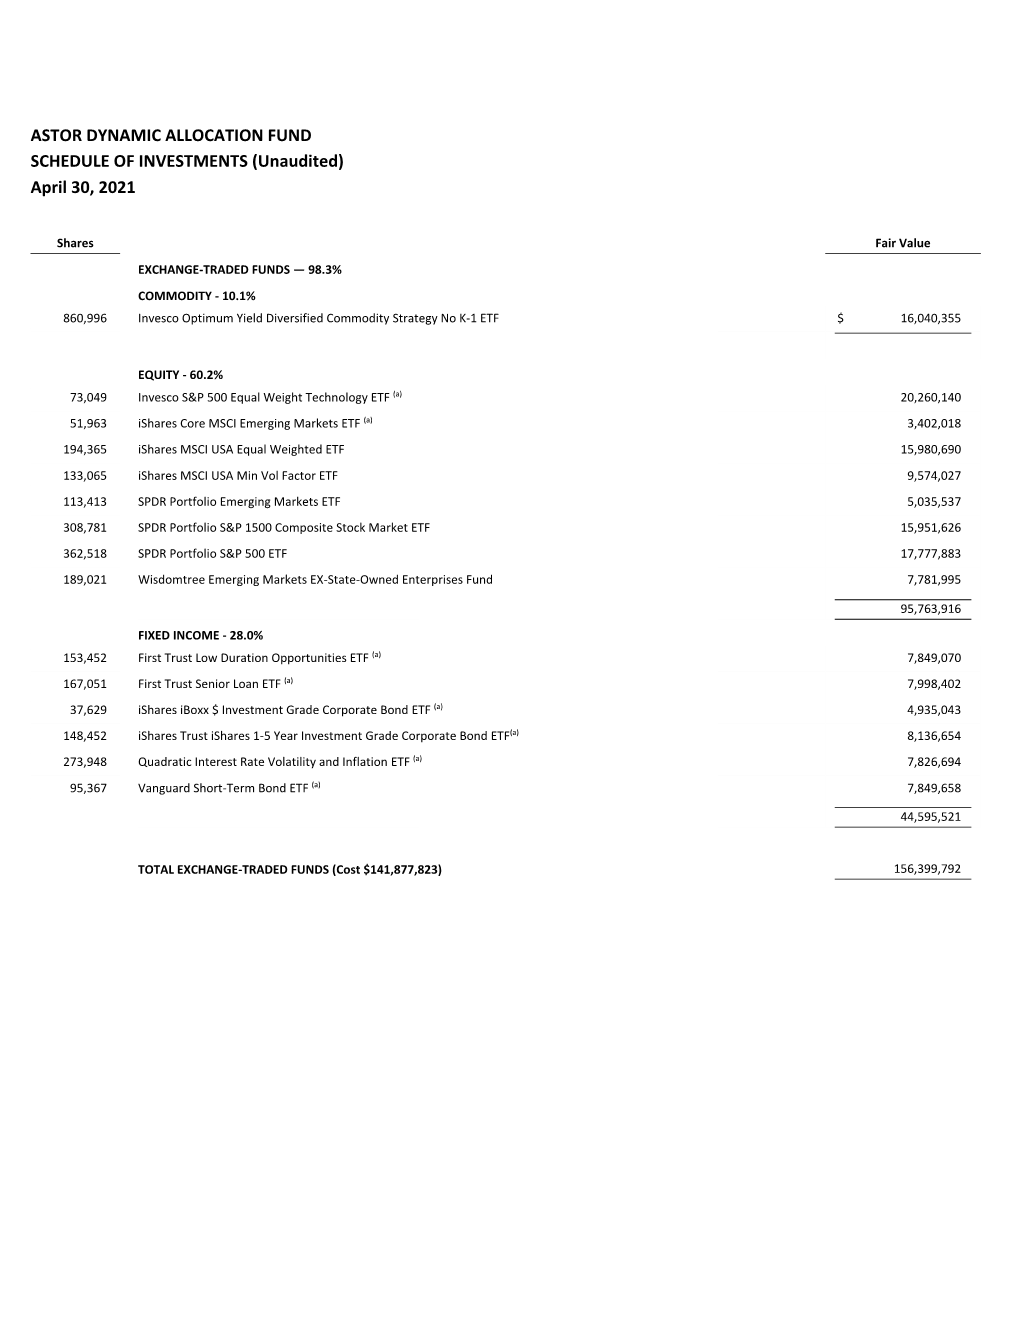 ASTOR DYNAMIC ALLOCATION FUND SCHEDULE of INVESTMENTS (Unaudited) April 30, 2021